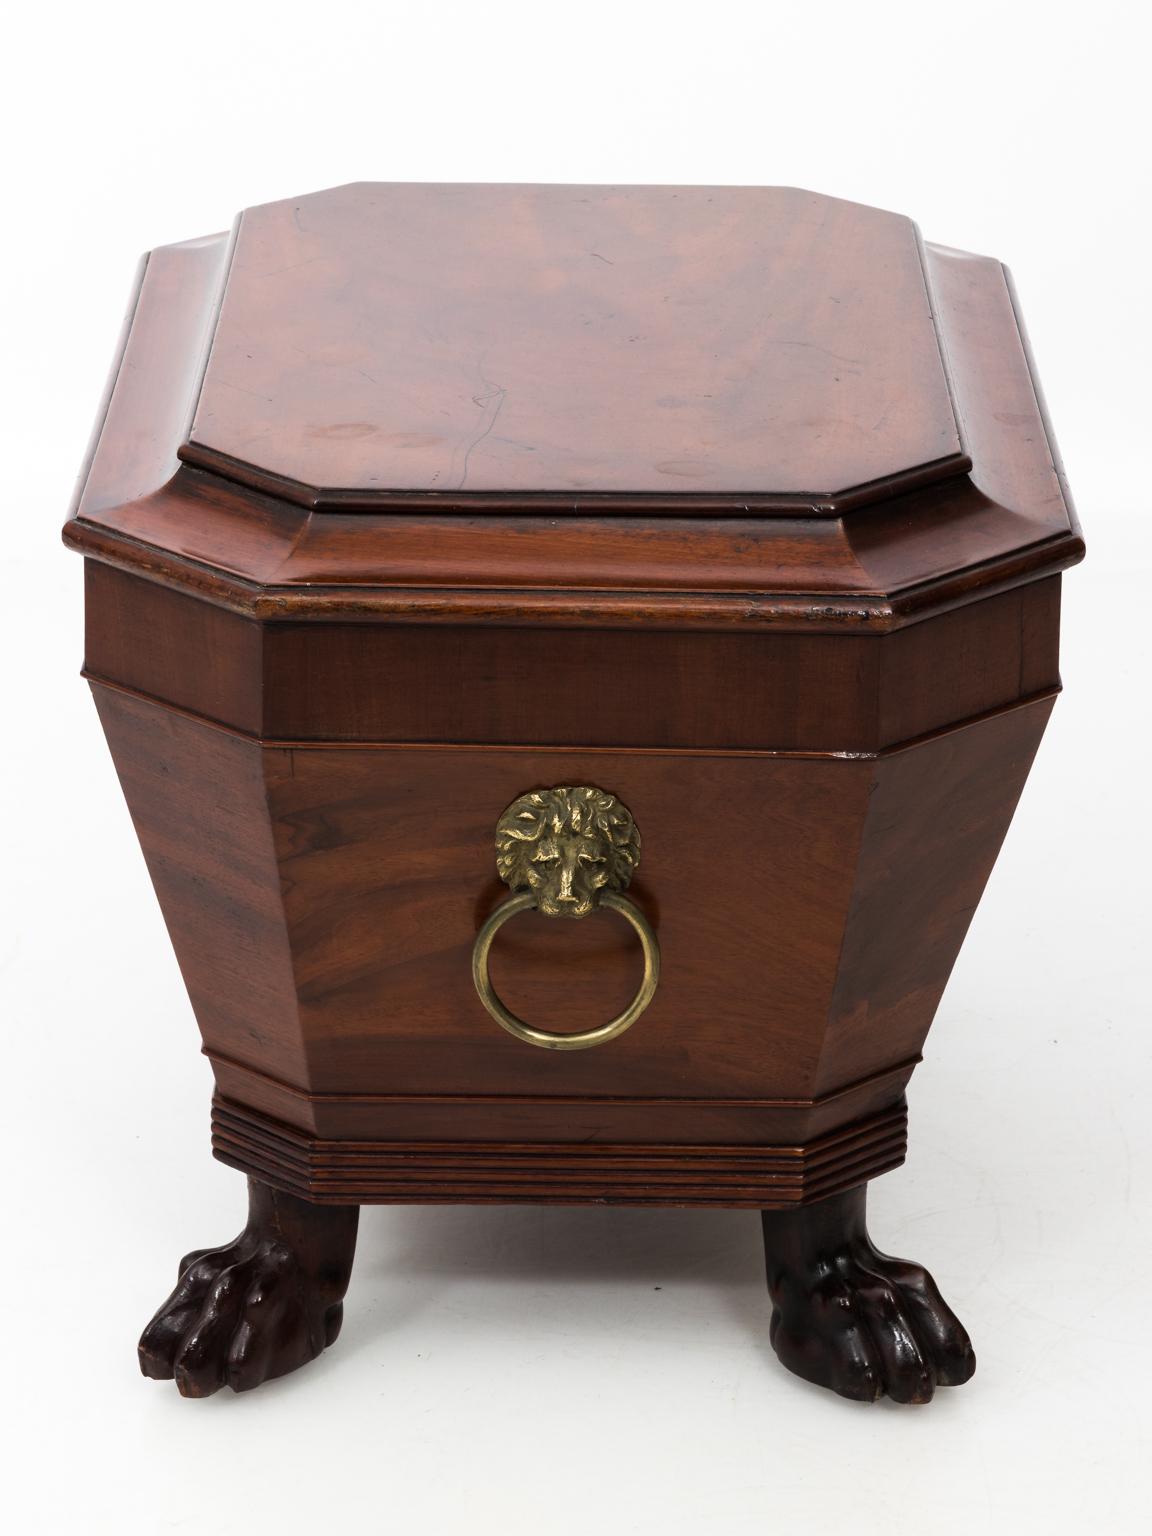 English Regency style cellaret in mahogany with recently replaced fauxwood liner, circa 1820s-1830s. The box is highlighted with original brass hardware and carved lion's paw feet. There is also wear with age as seen with surface scratches on the